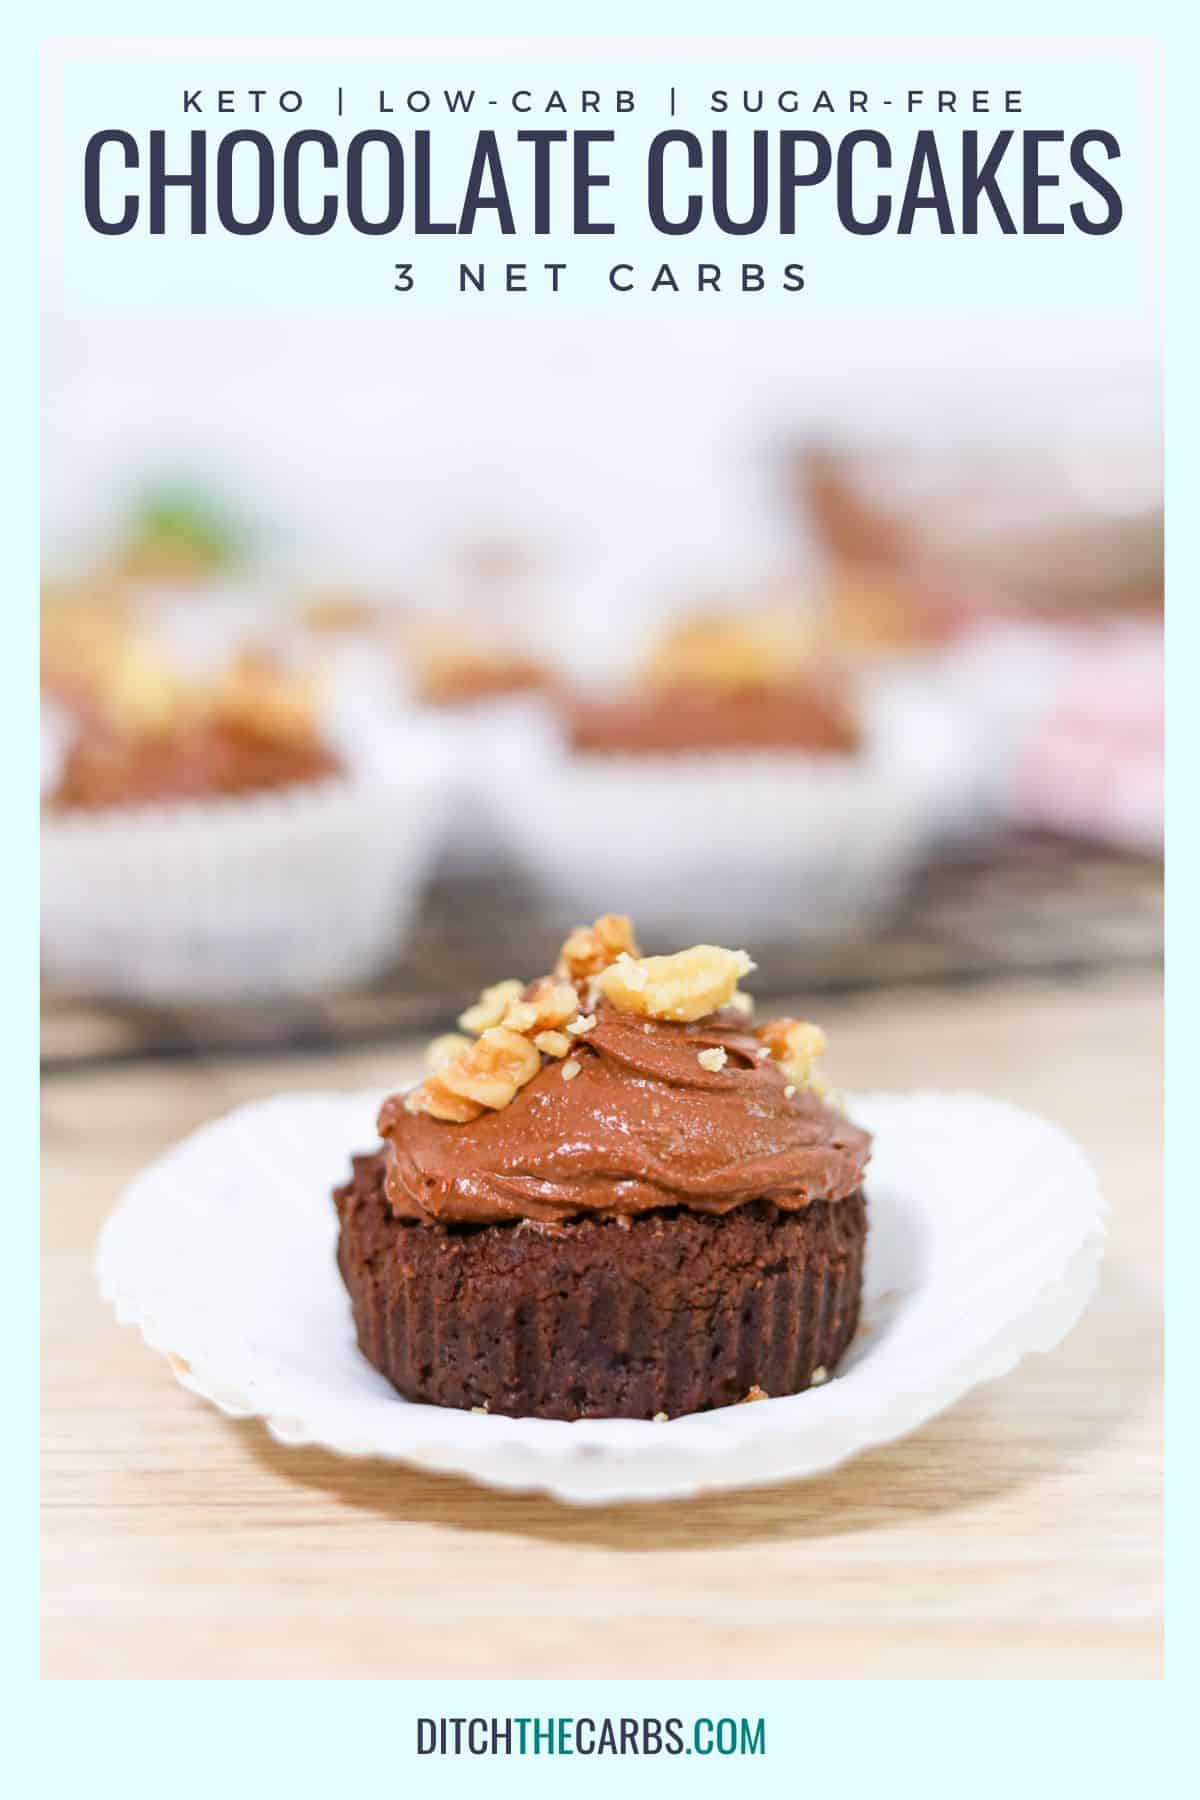 a chocolate cupcake covered in chocolate frosting wth a walnut on top